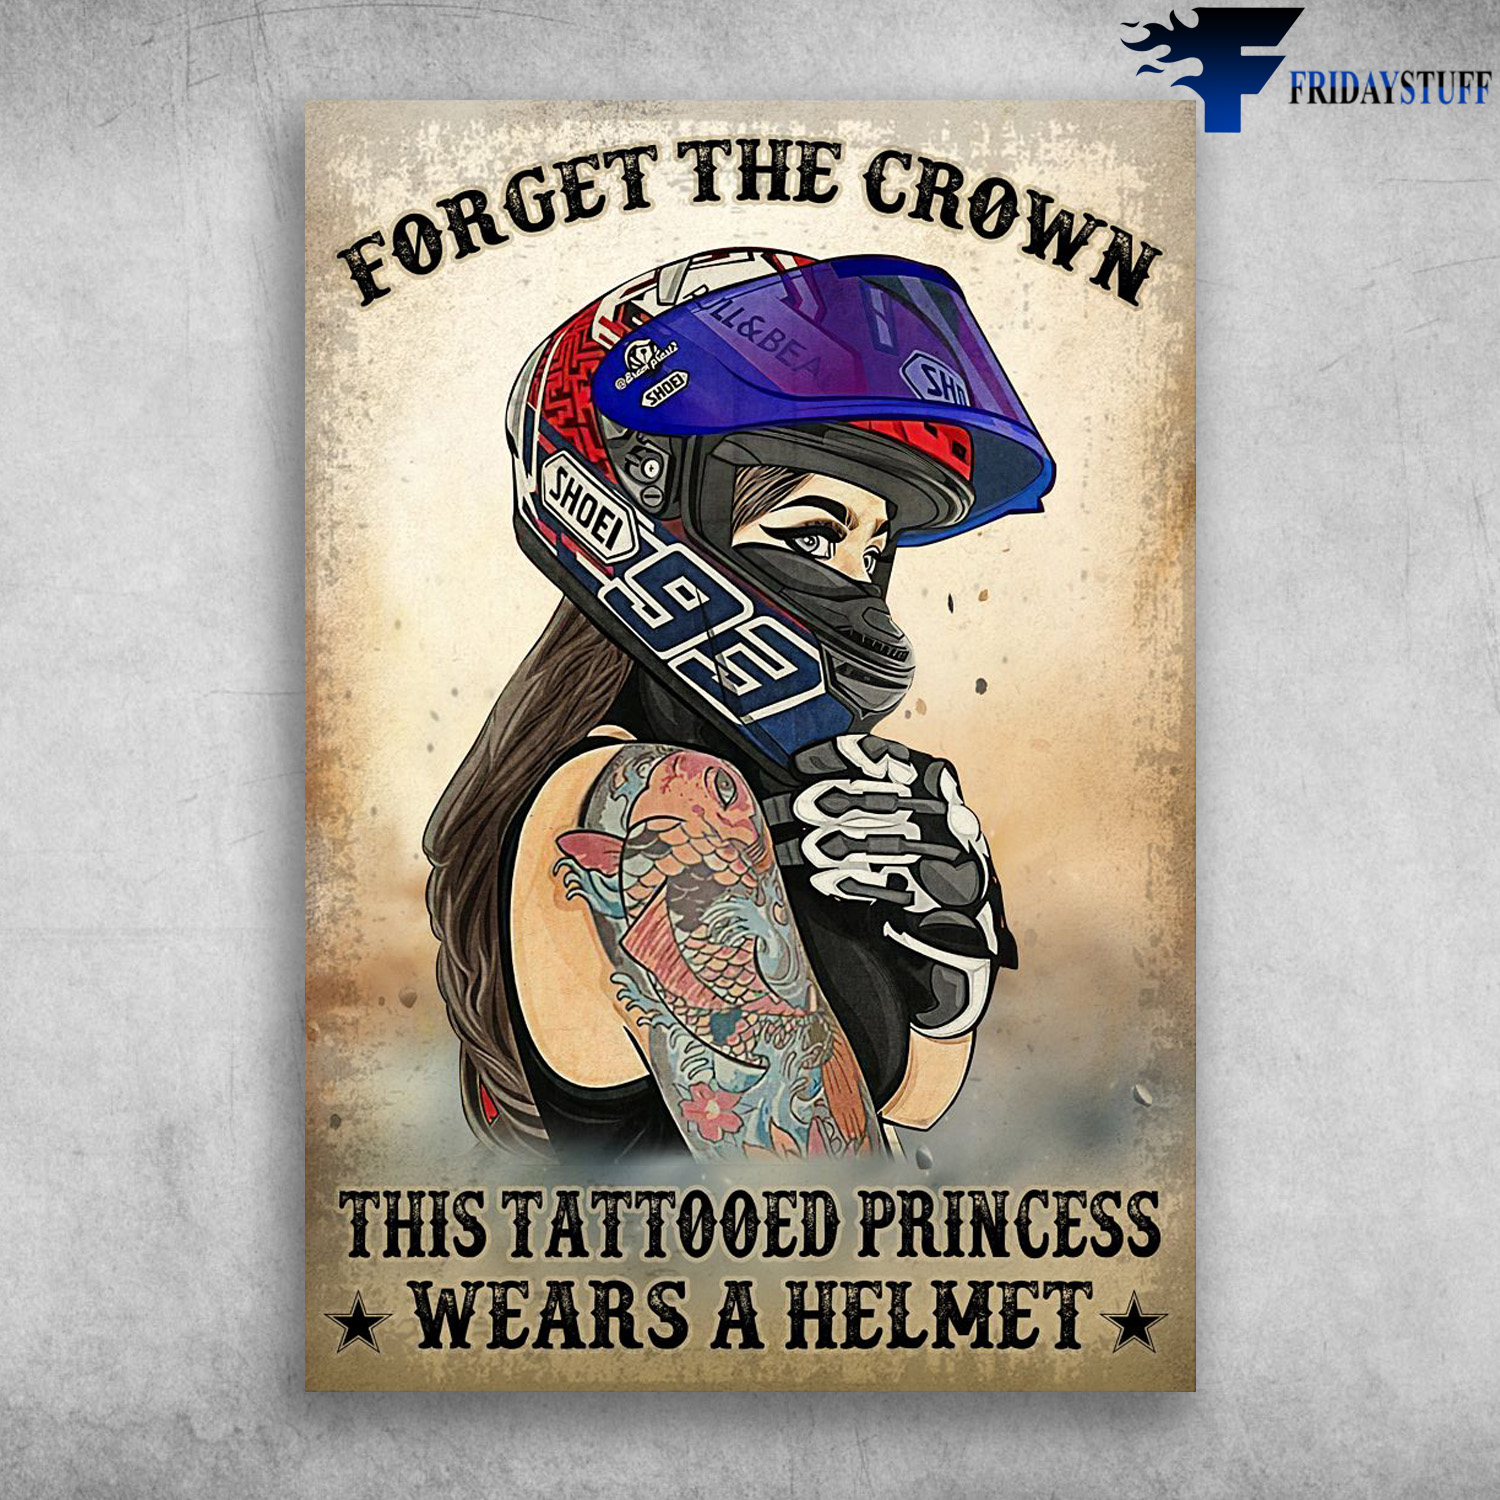 Tattoo Girl, Girl Motorcycling - Forget The Crown, This Tattooed Princess, Wears A Helmet